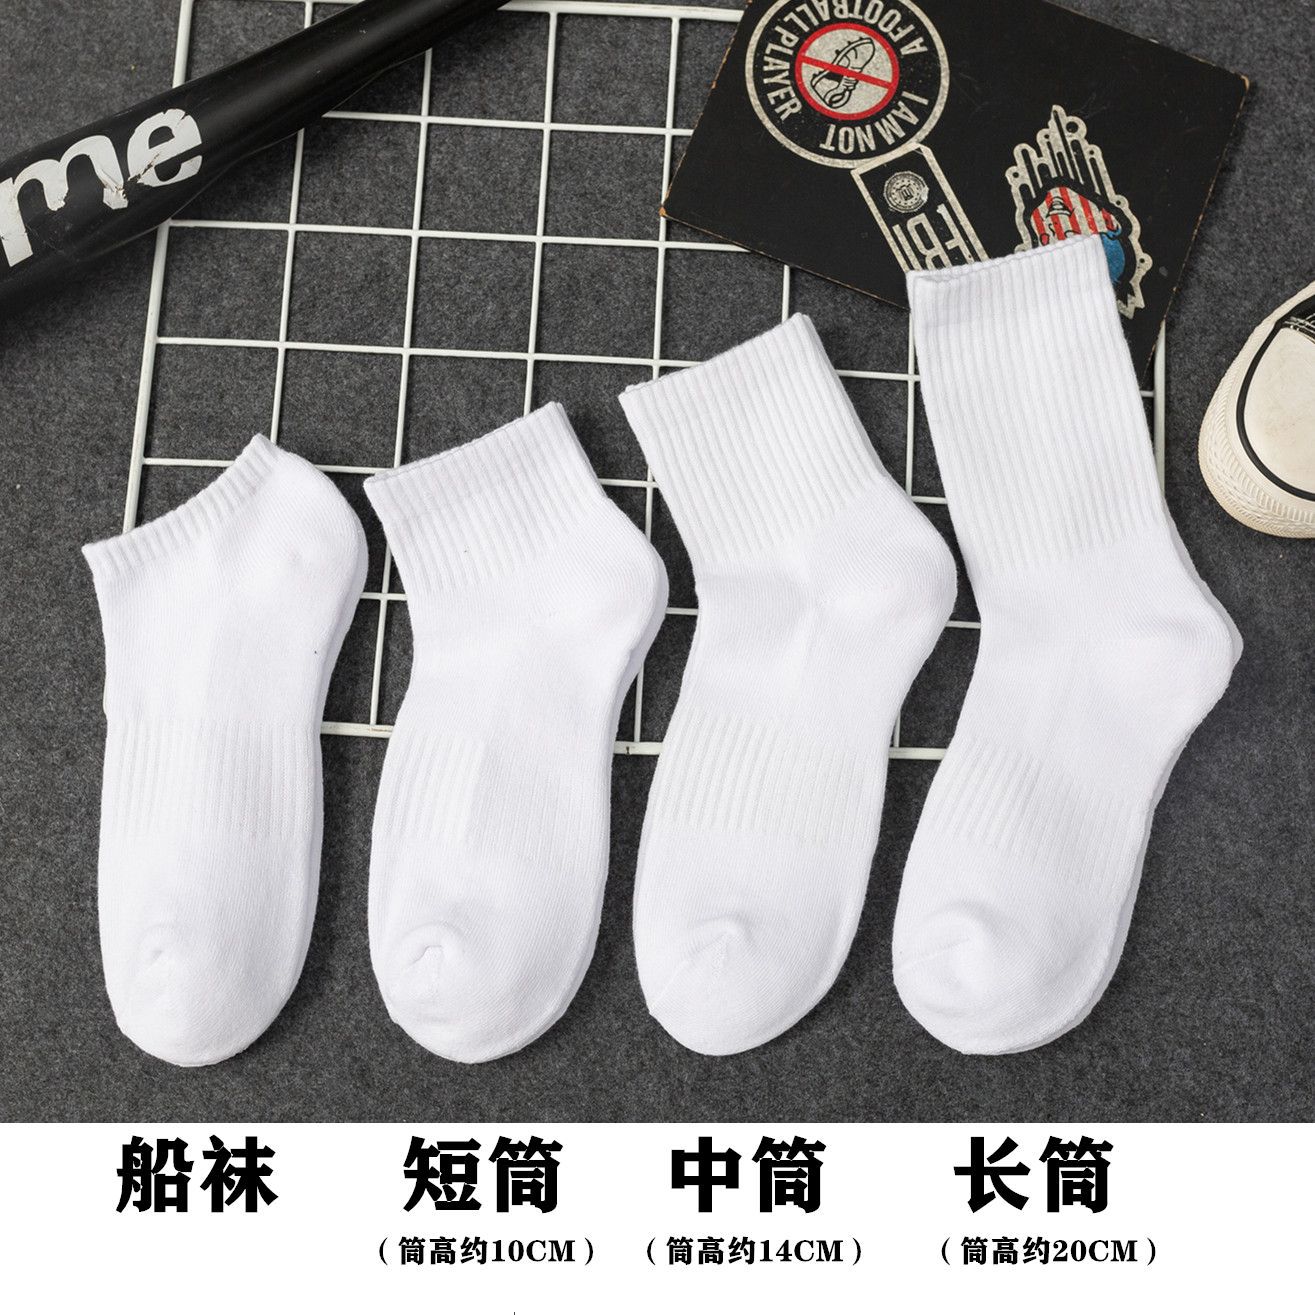 simple socks men‘s mid-calf athletic socks solid color towel bottom thickened spring and summer long long socks pure white socks